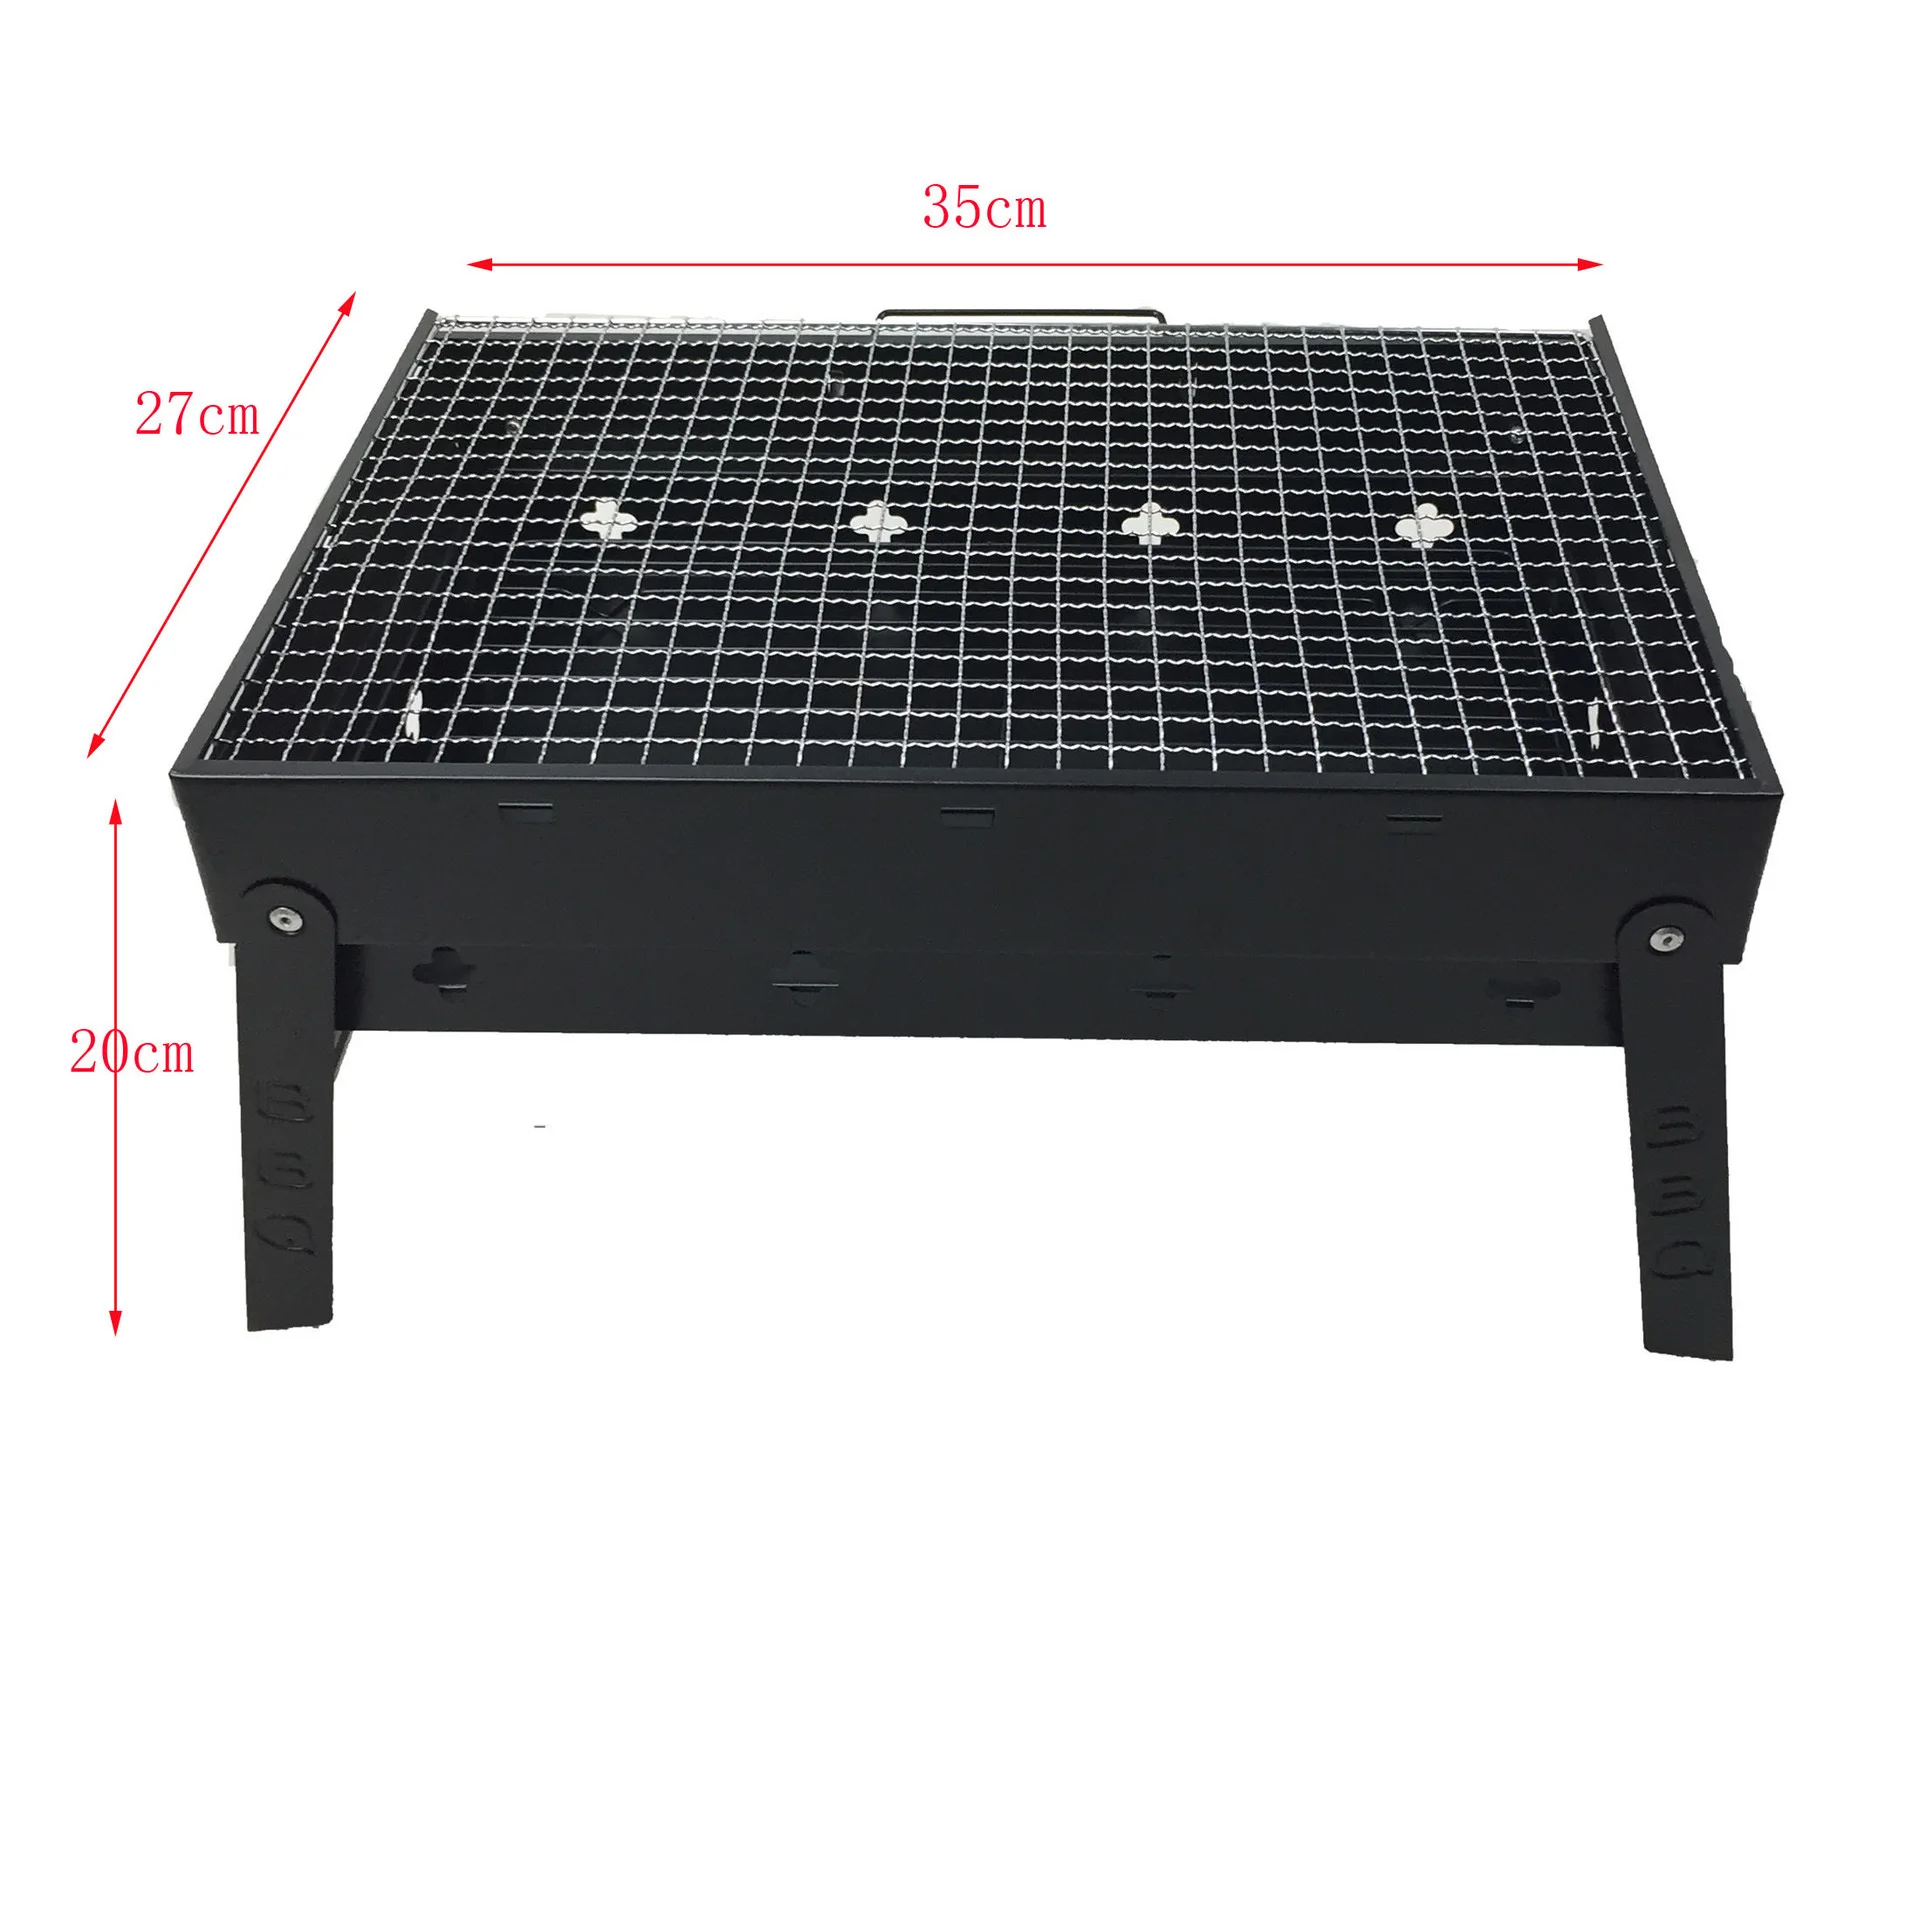 Folding portable charcoal BBQ for outdoor smoker Durable Mini Foldable barbeque grill